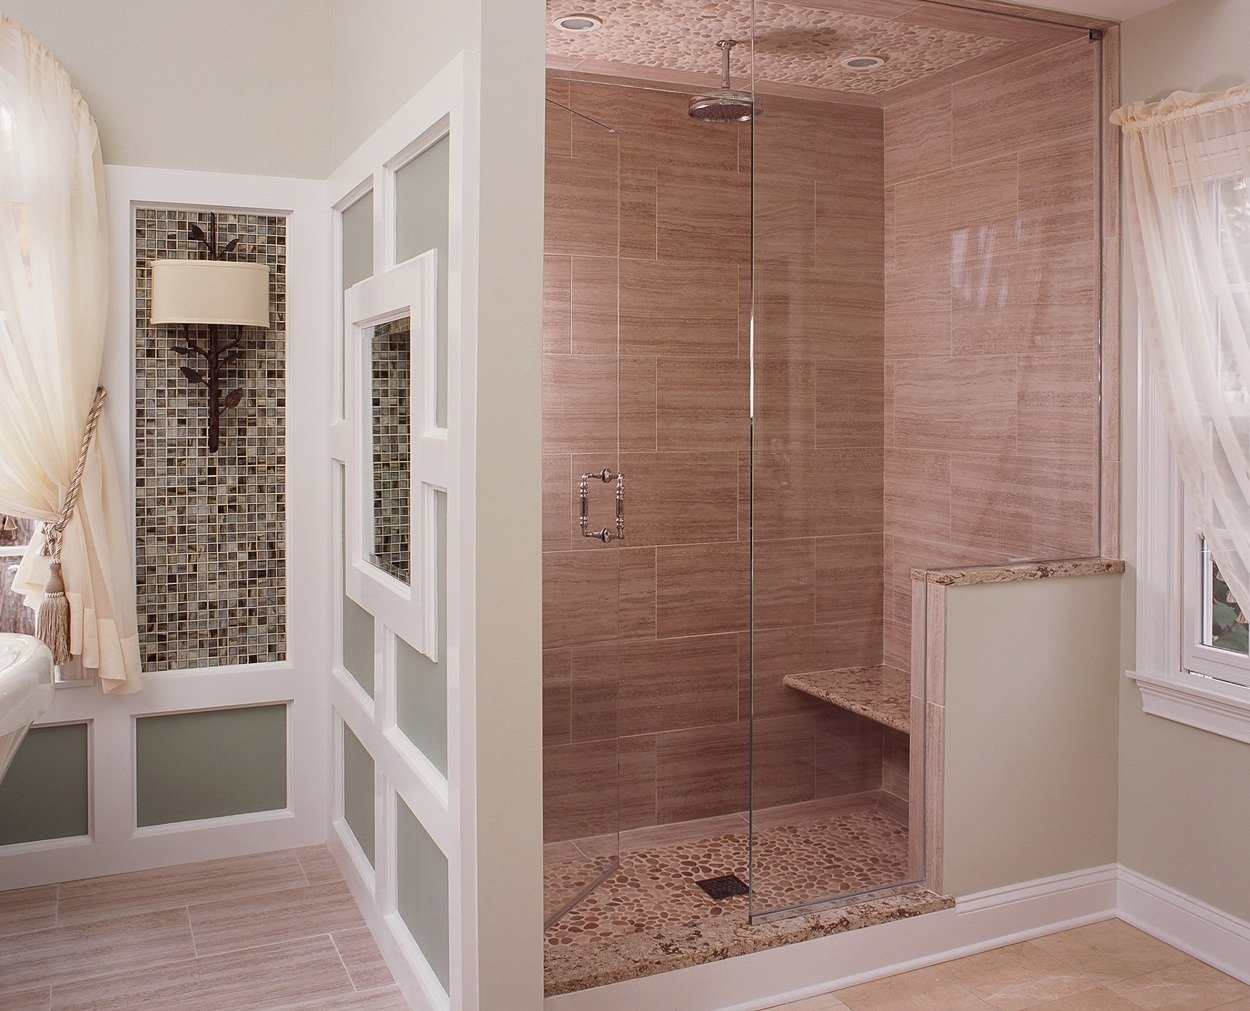 Stone pattern reflects on the floor and ceiling in this frameless shower.